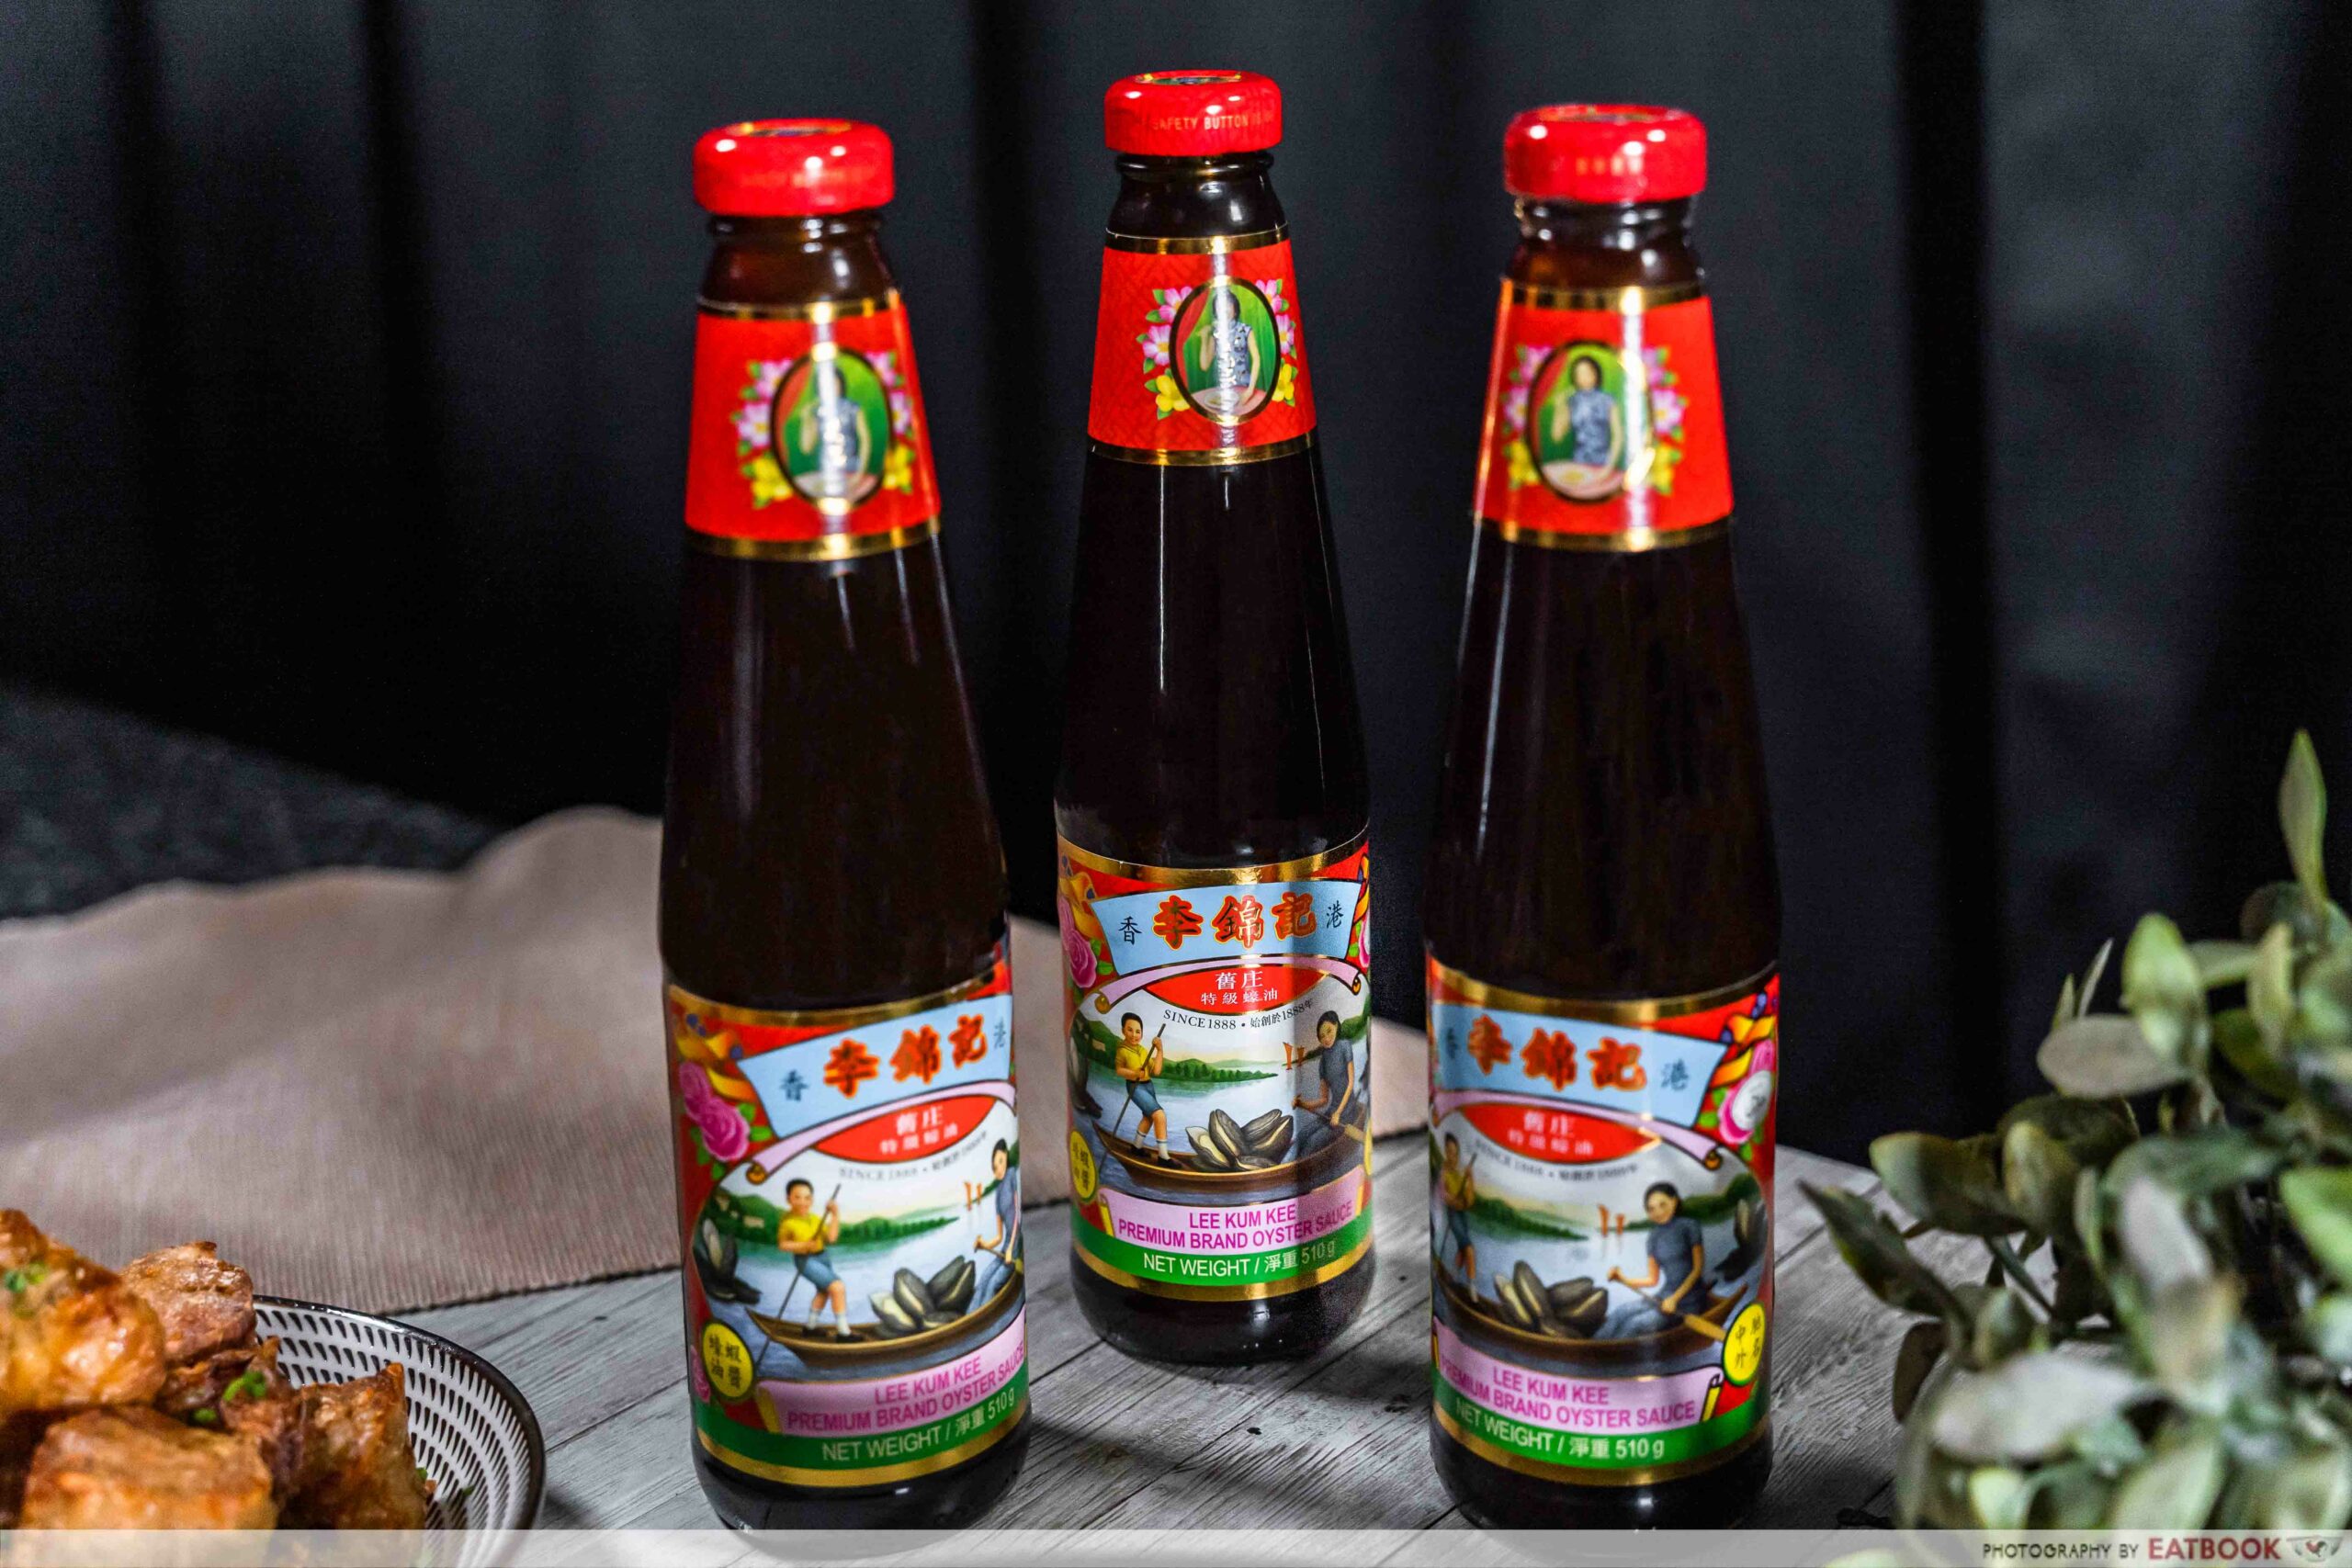 zi char recipes - lee kum kee oyster sauce